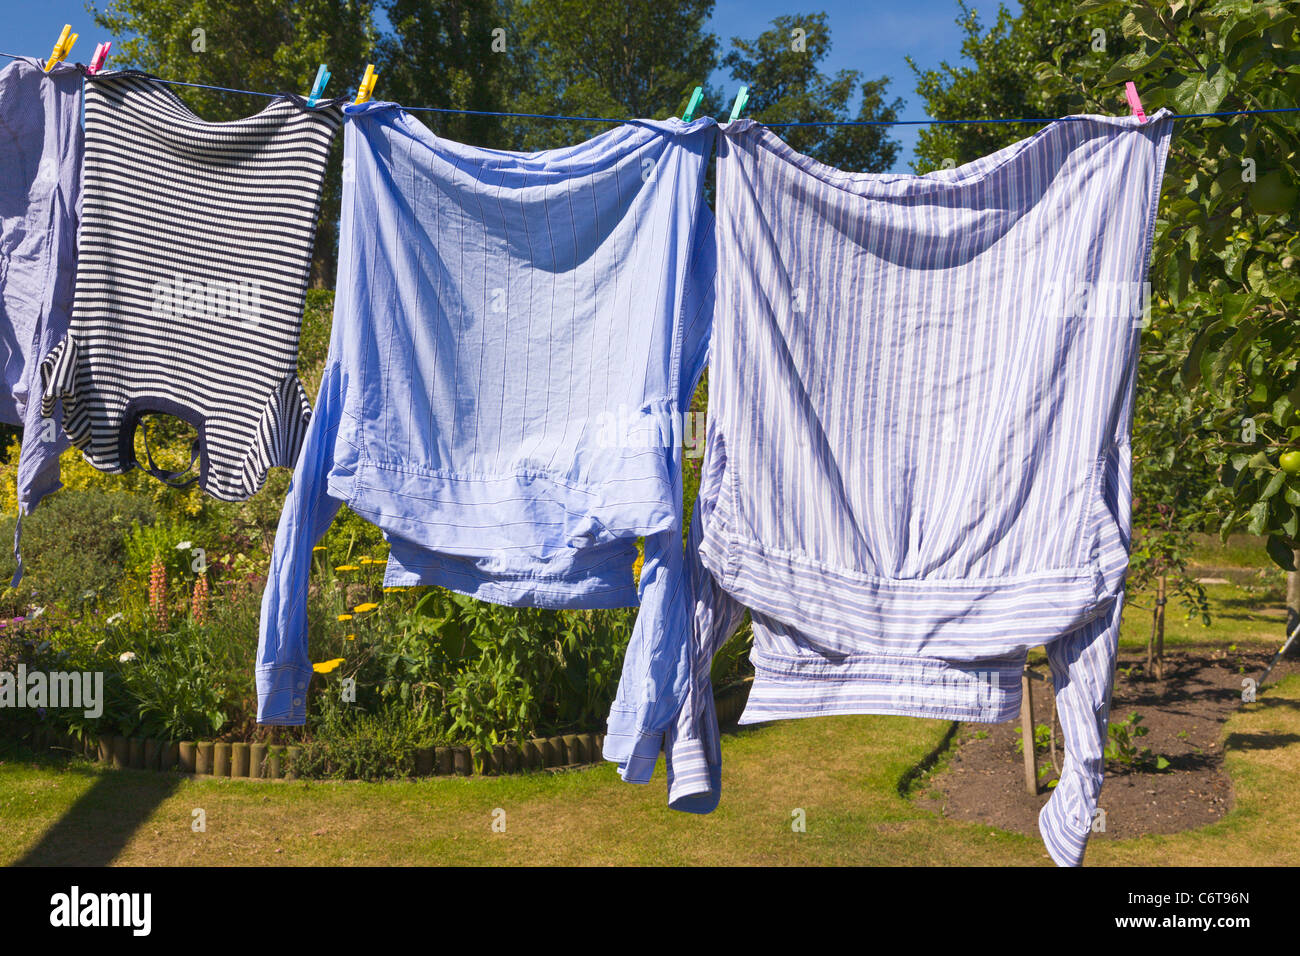 Washing hanging on clothes line Stock Photo